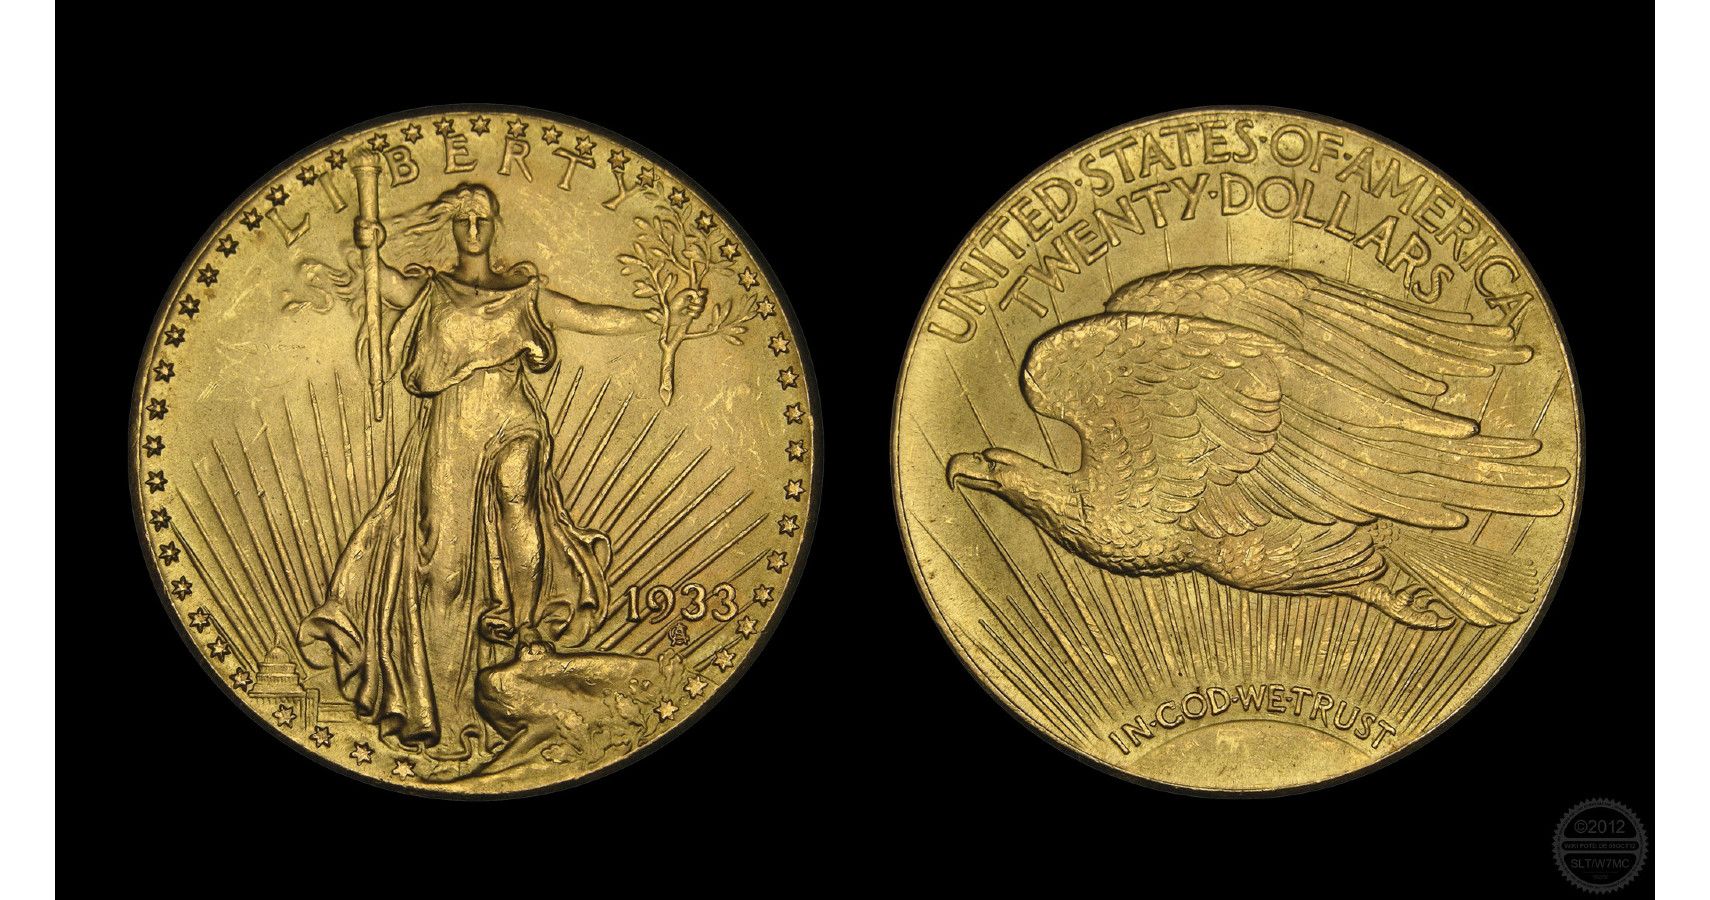 The Most Expensive Coins In The World, Ranked